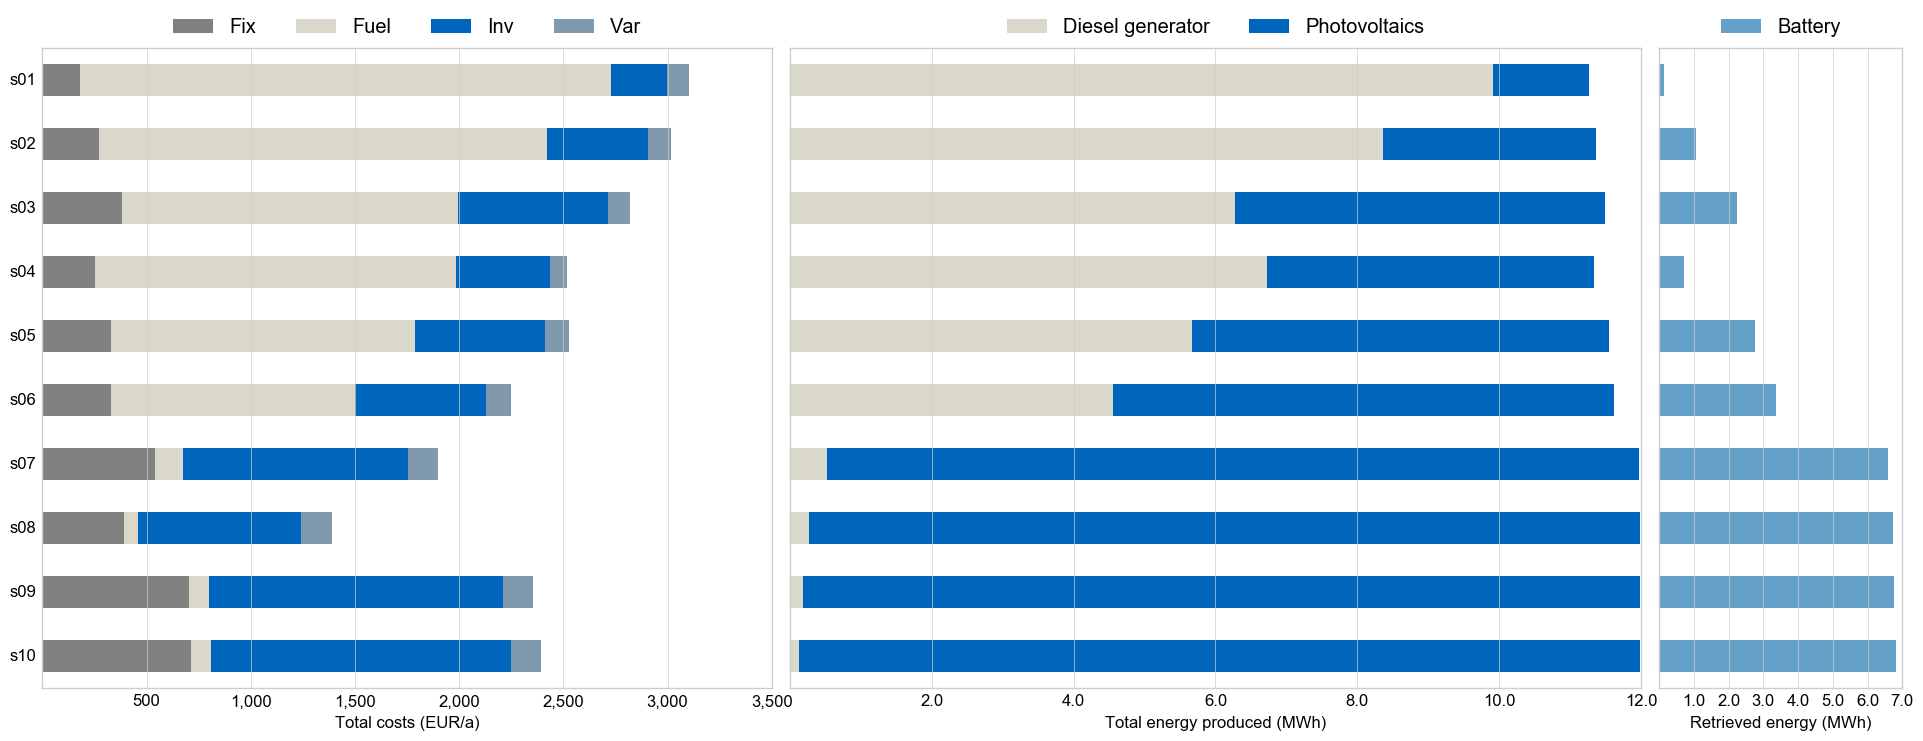 Bar chart of total system cost, electricity generation shares and storage use for all ten scenarios s01 to s10.